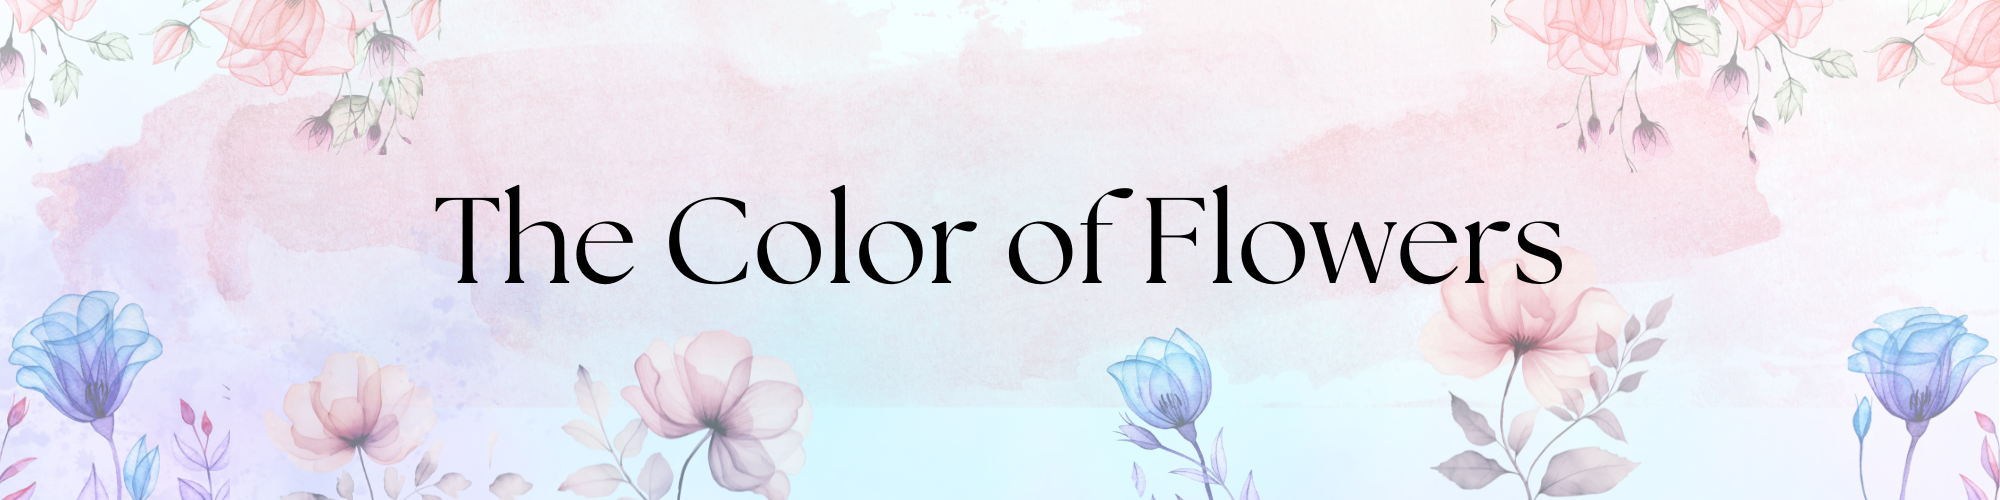 The Color of Flowers